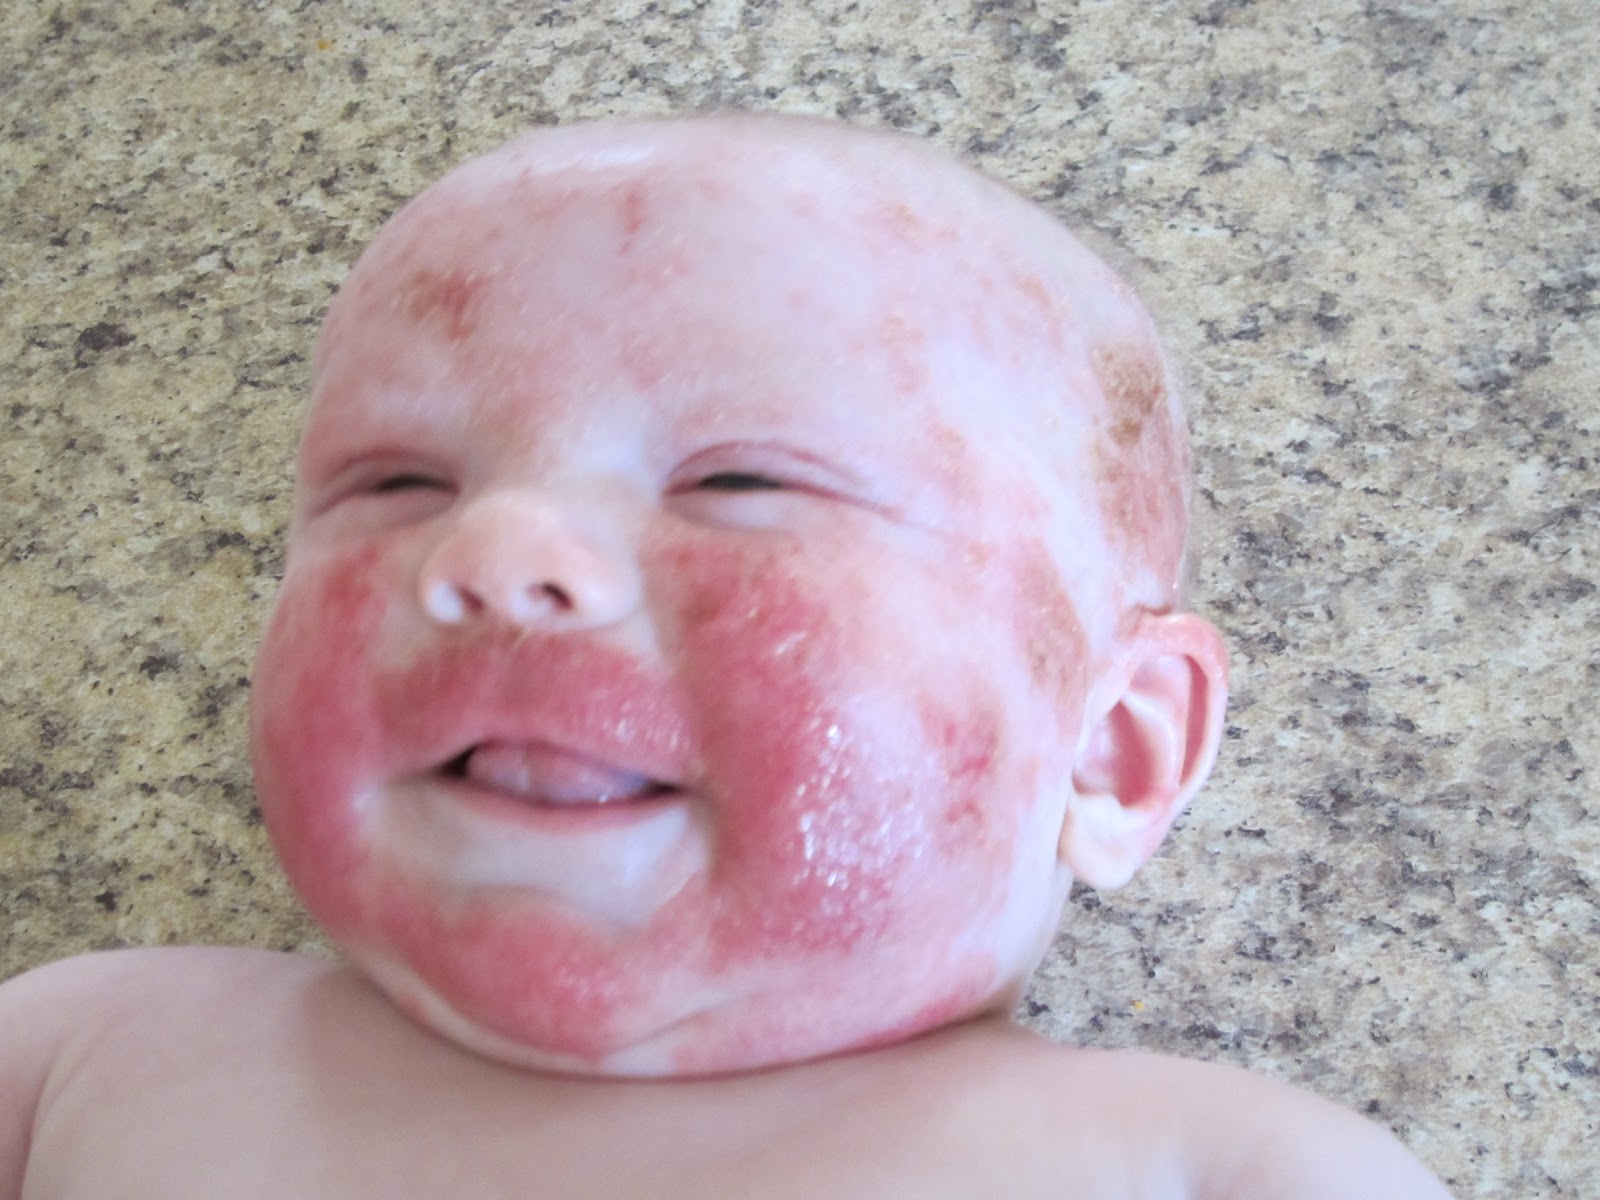 Adams Family: Severe Allergy Induced Eczema On My Infant.